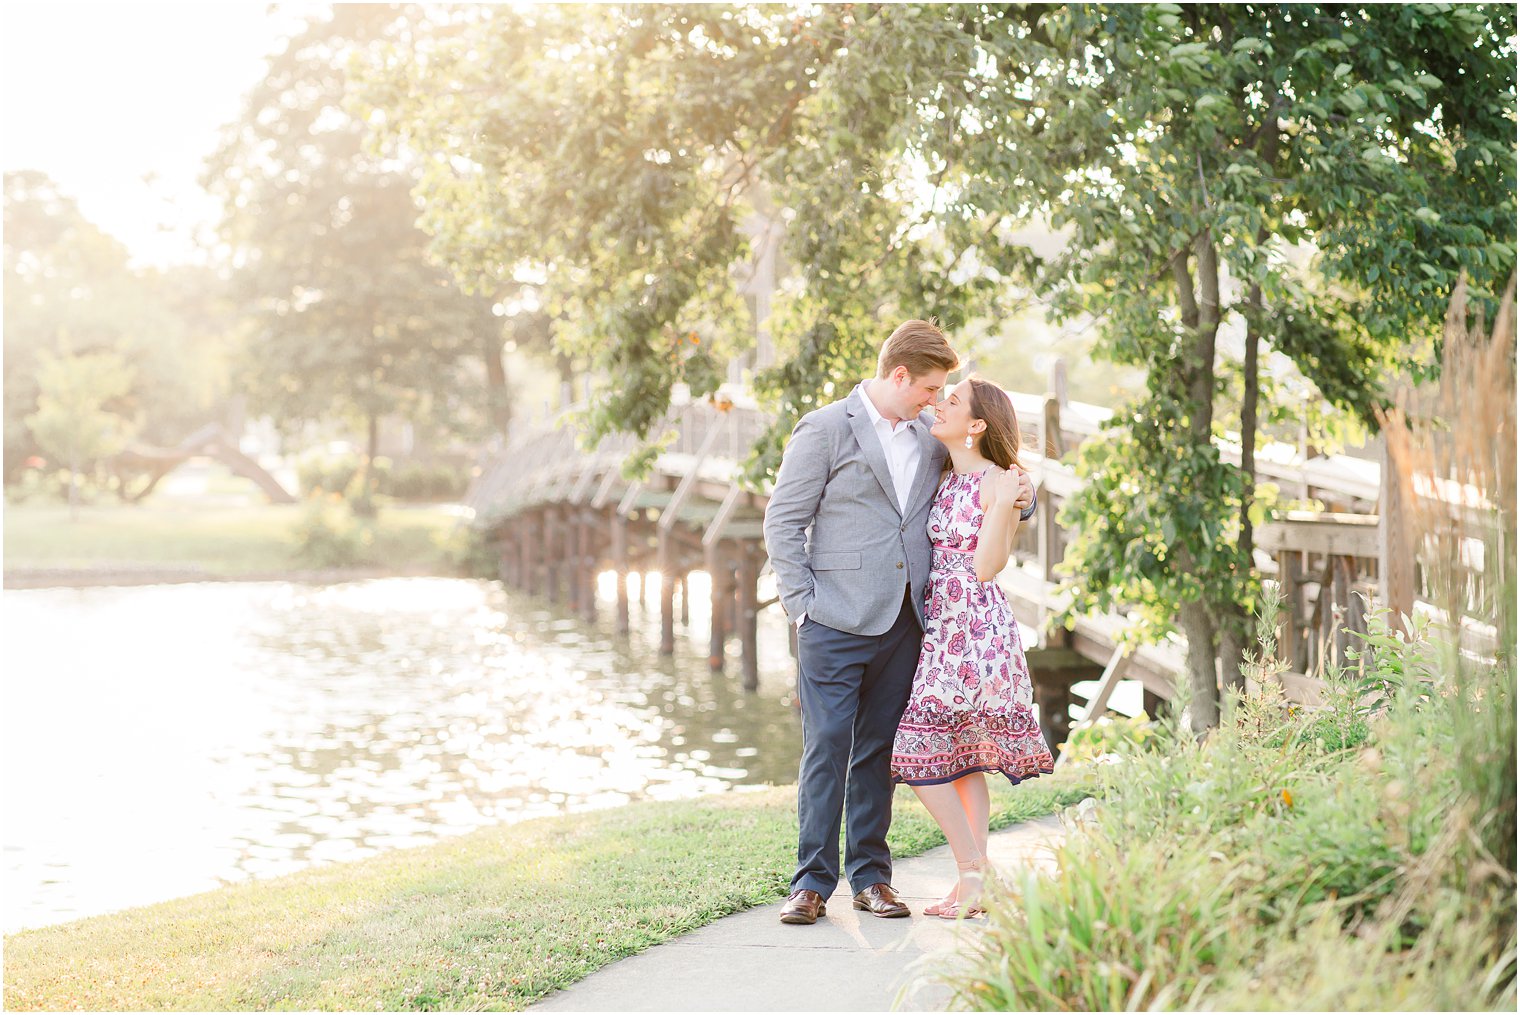 Preppy outfits for engagement photos in Spring Lake